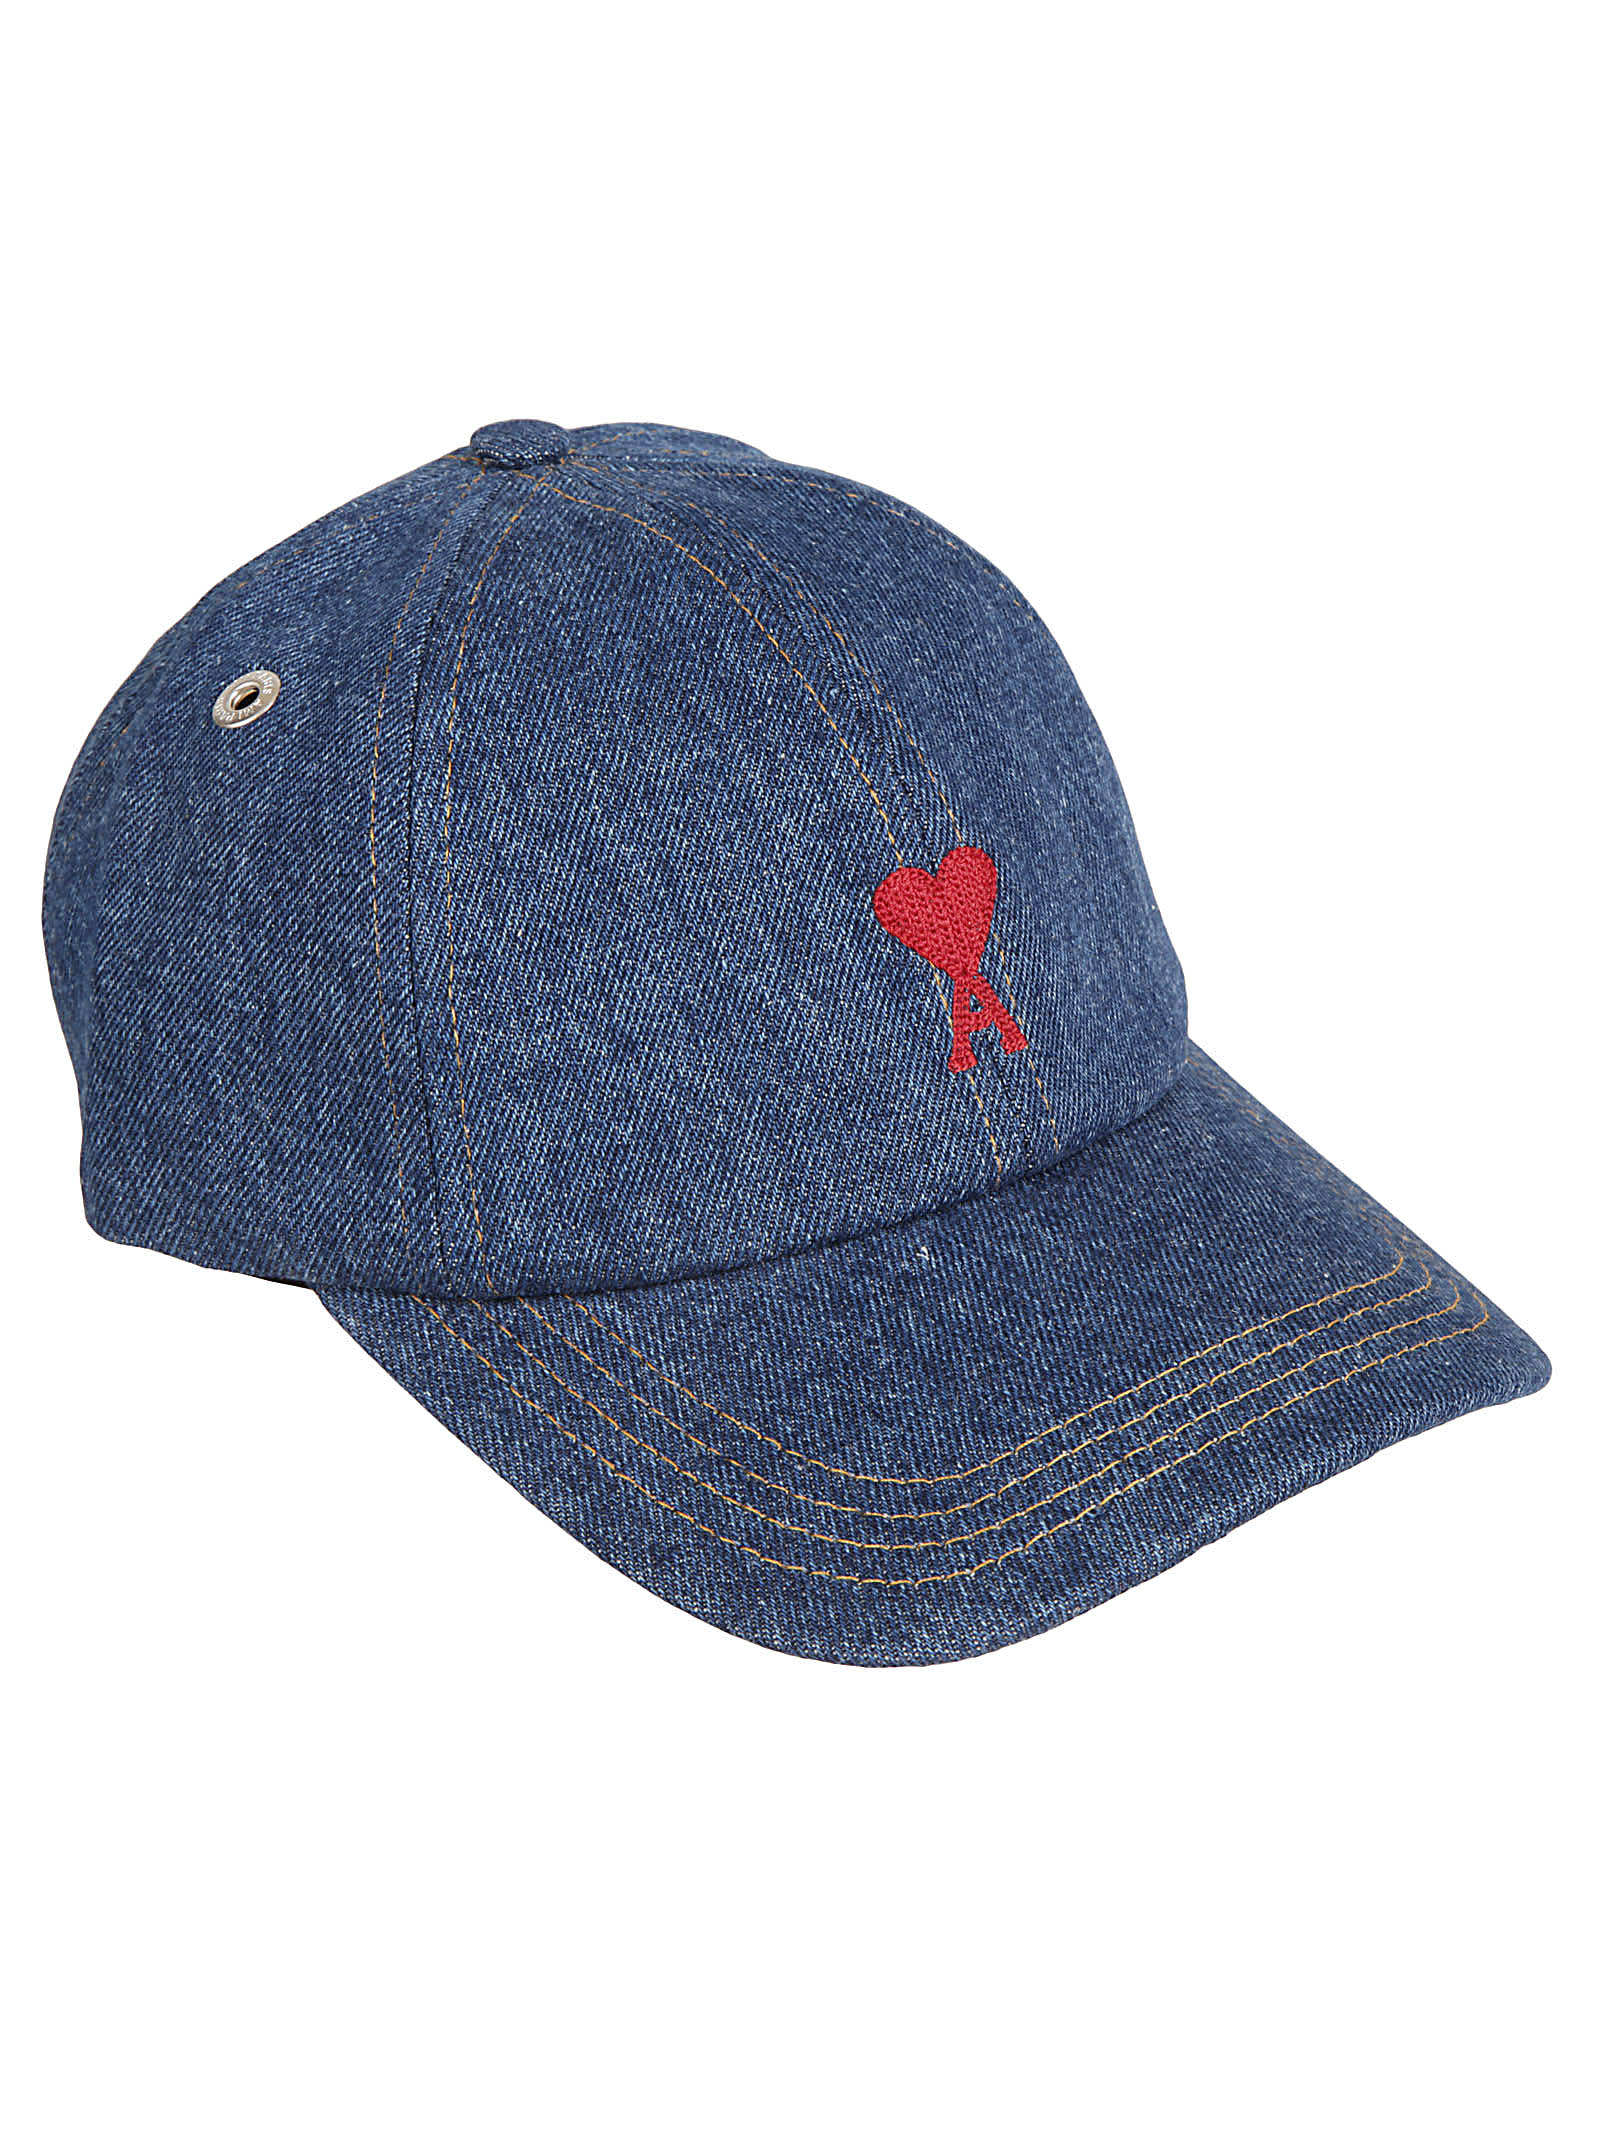 Adc Embroidery Cap